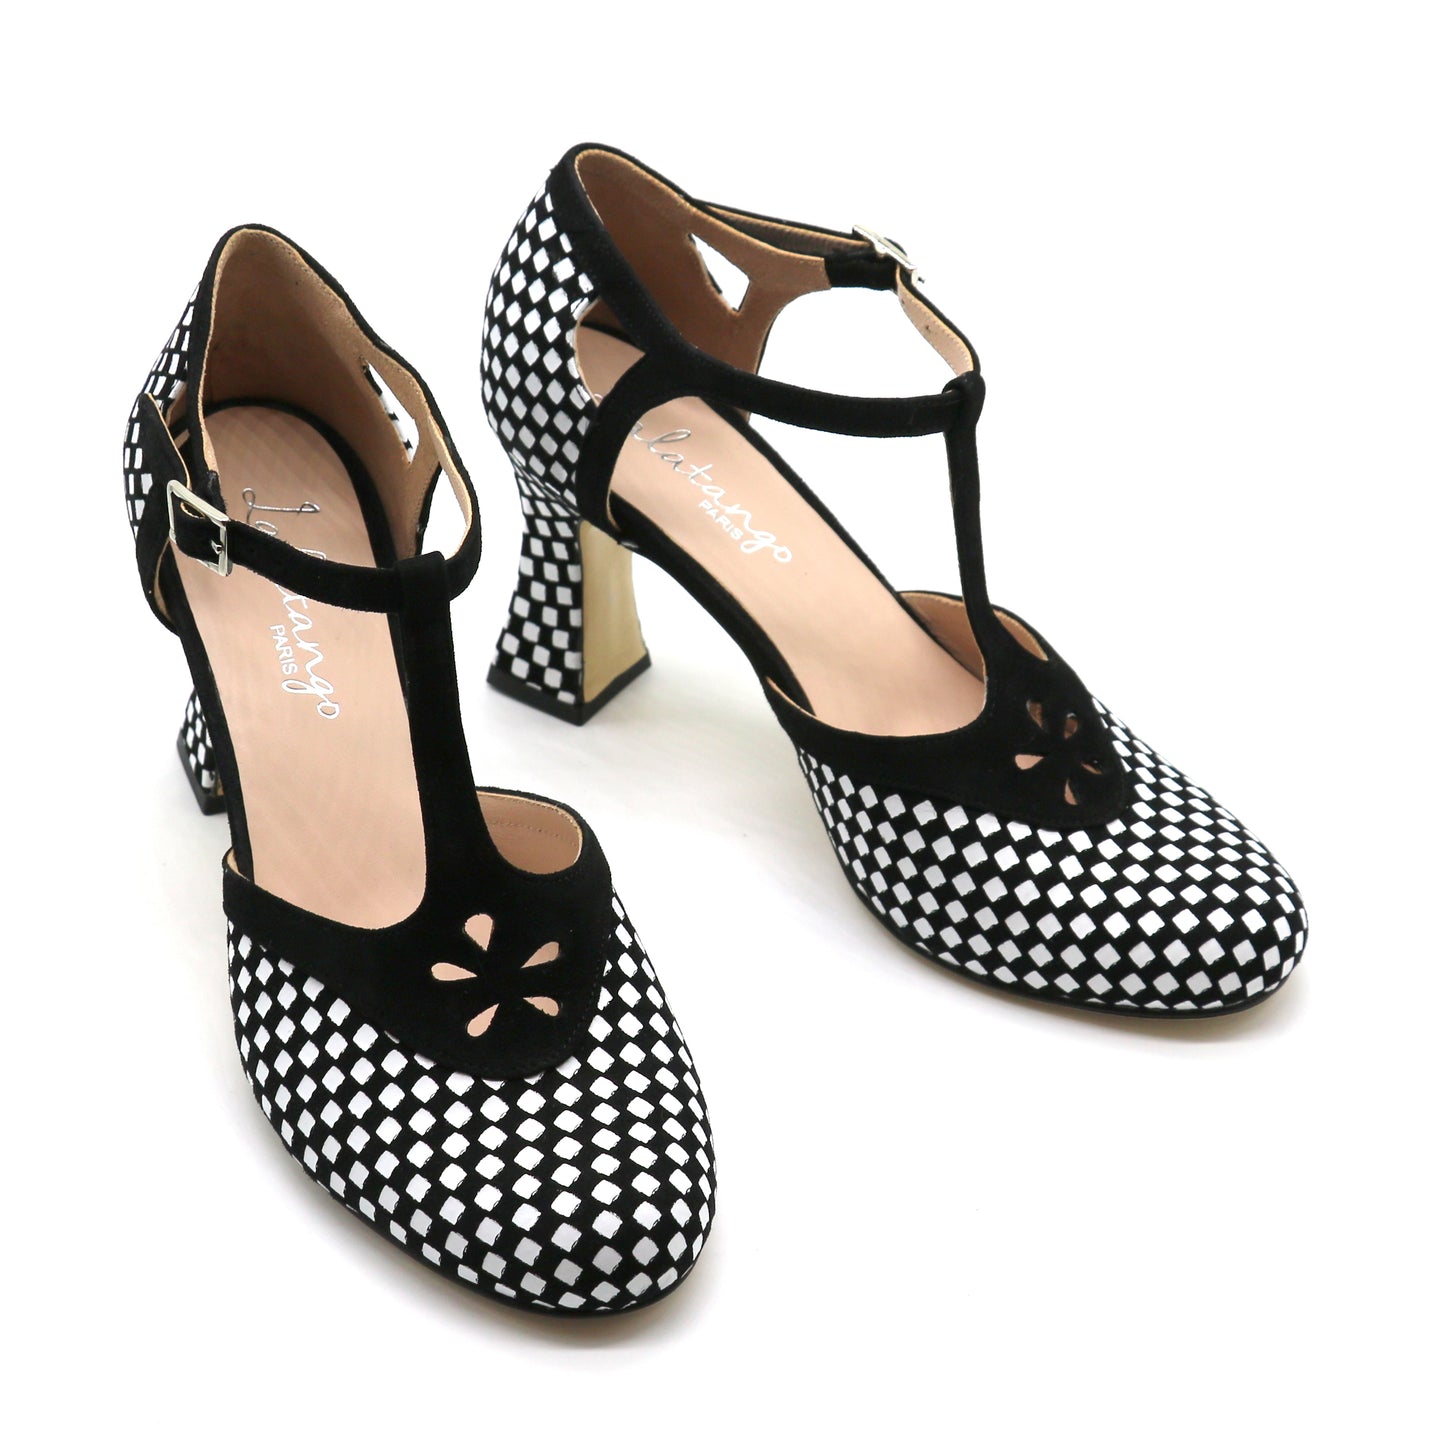 Salta black and white checkered leather